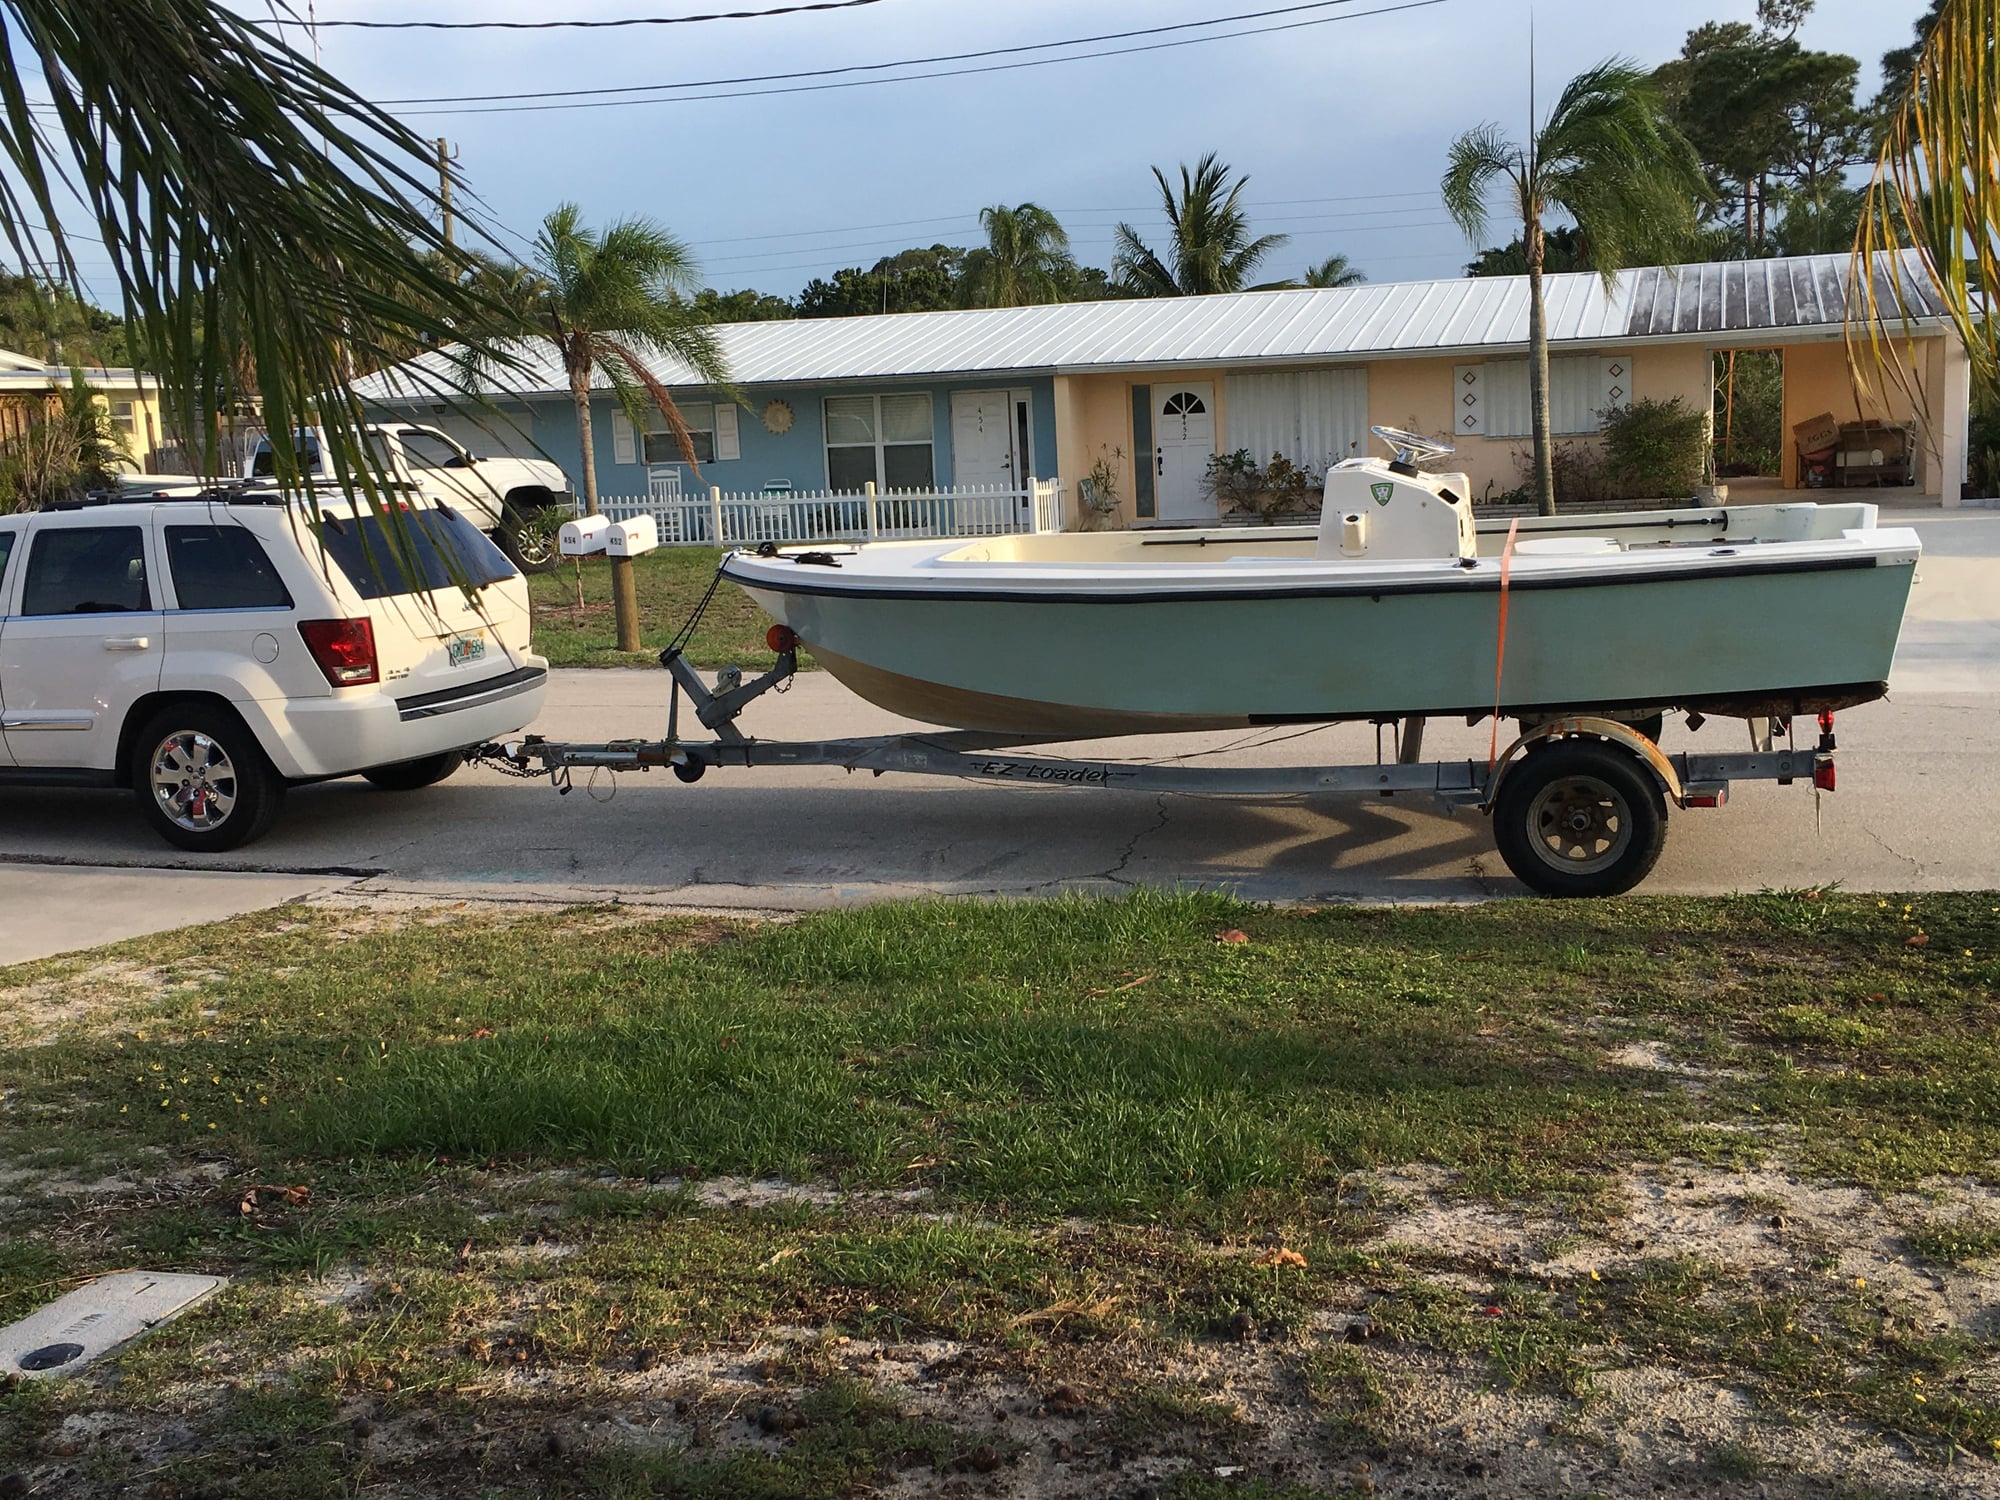 1974 17 Mako Build - The Hull Truth - Boating and Fishing Forum